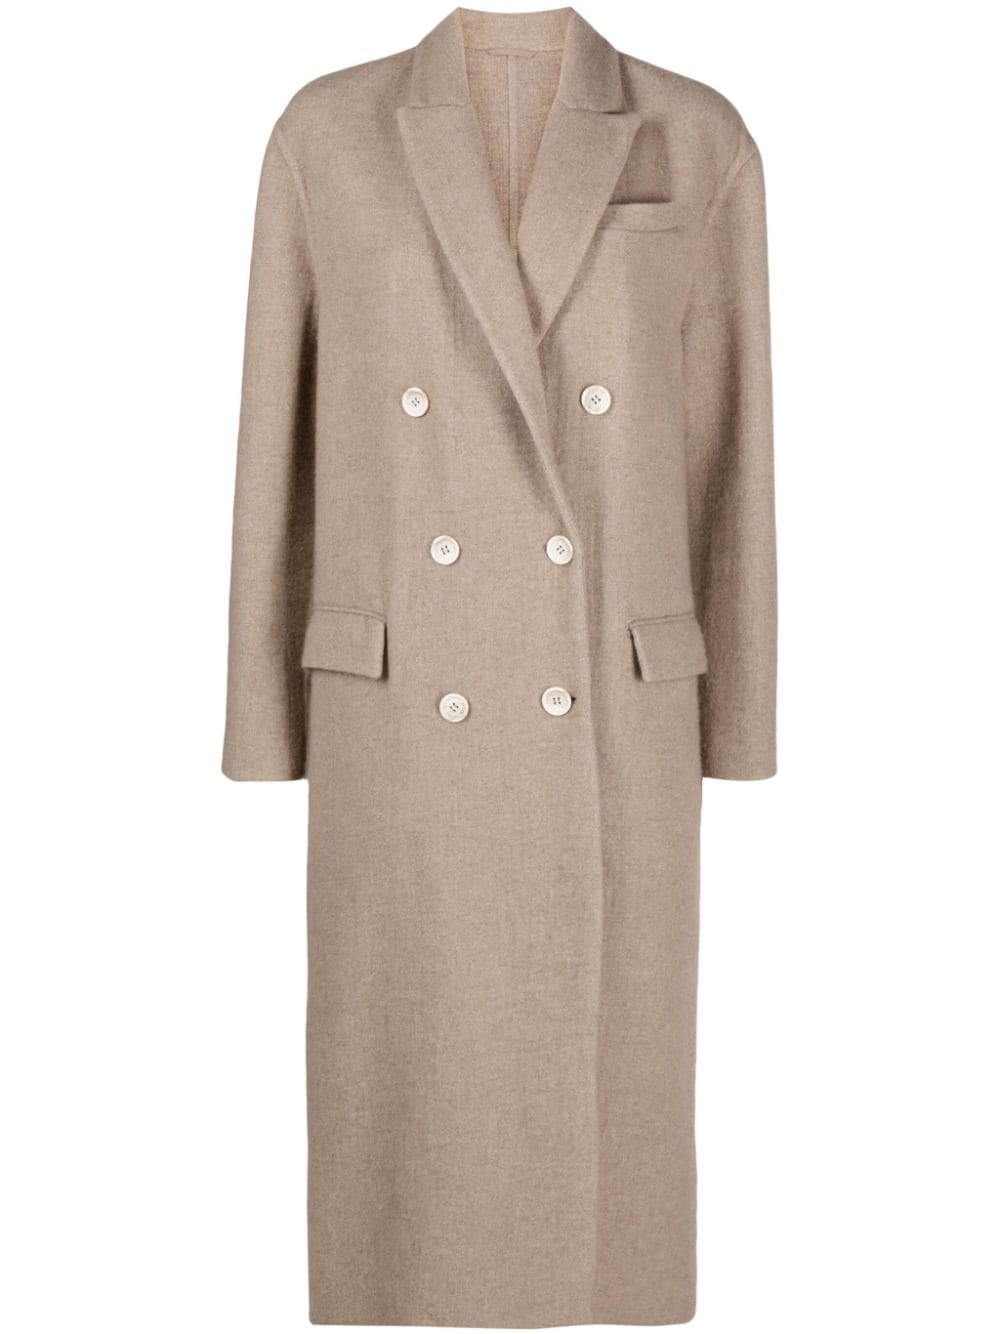 Image 1 of Brunello Cucinelli double-breasted cashmere coat